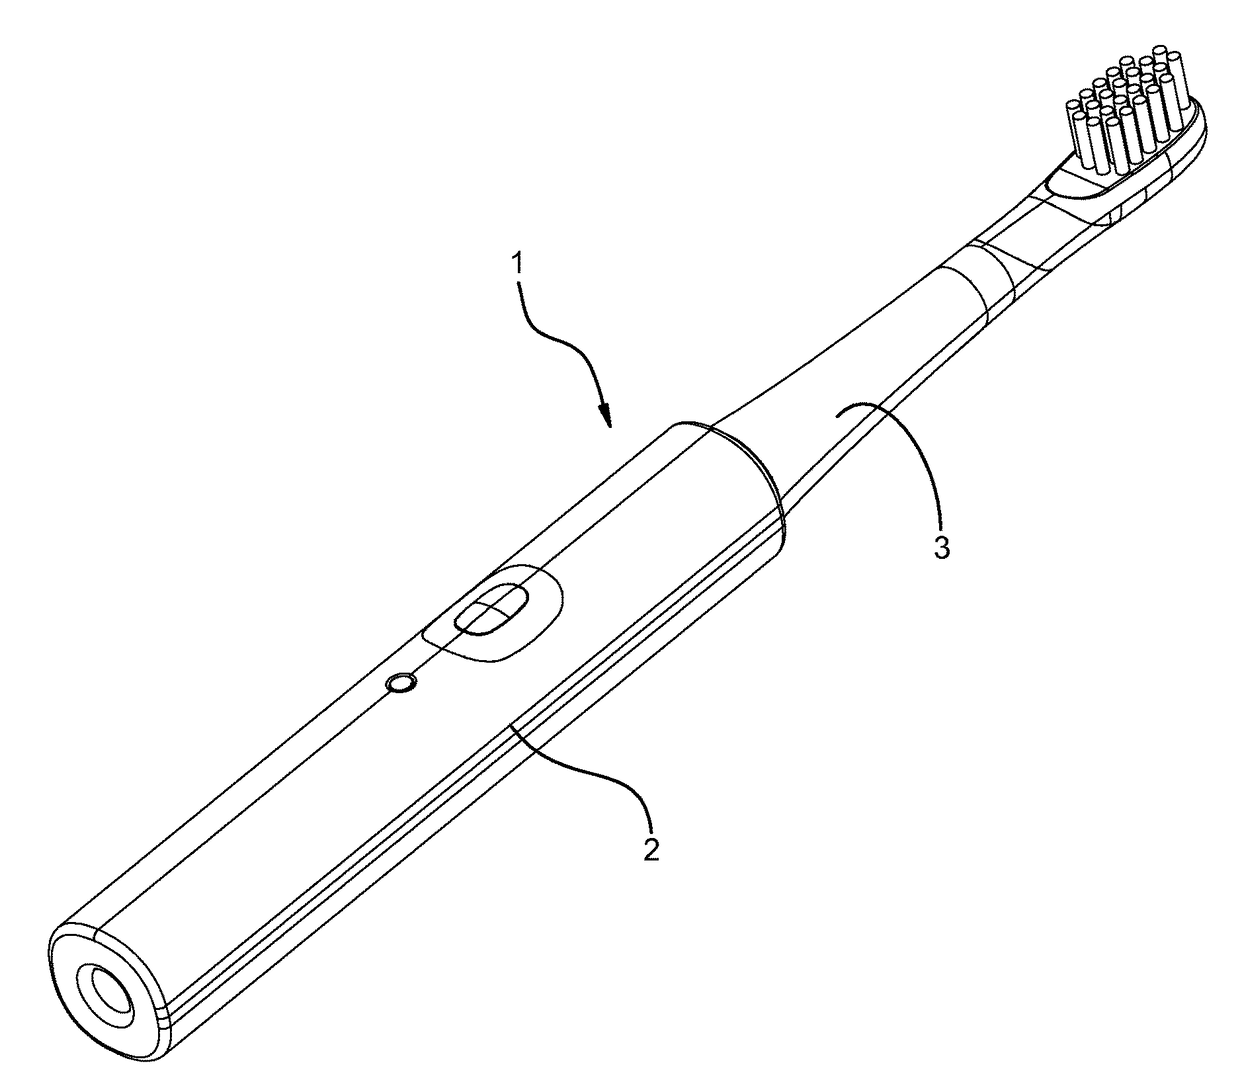 Electric Toothbrush with a Rechargeable Battery, and Inductance Charger Apparatus for Use with the Same